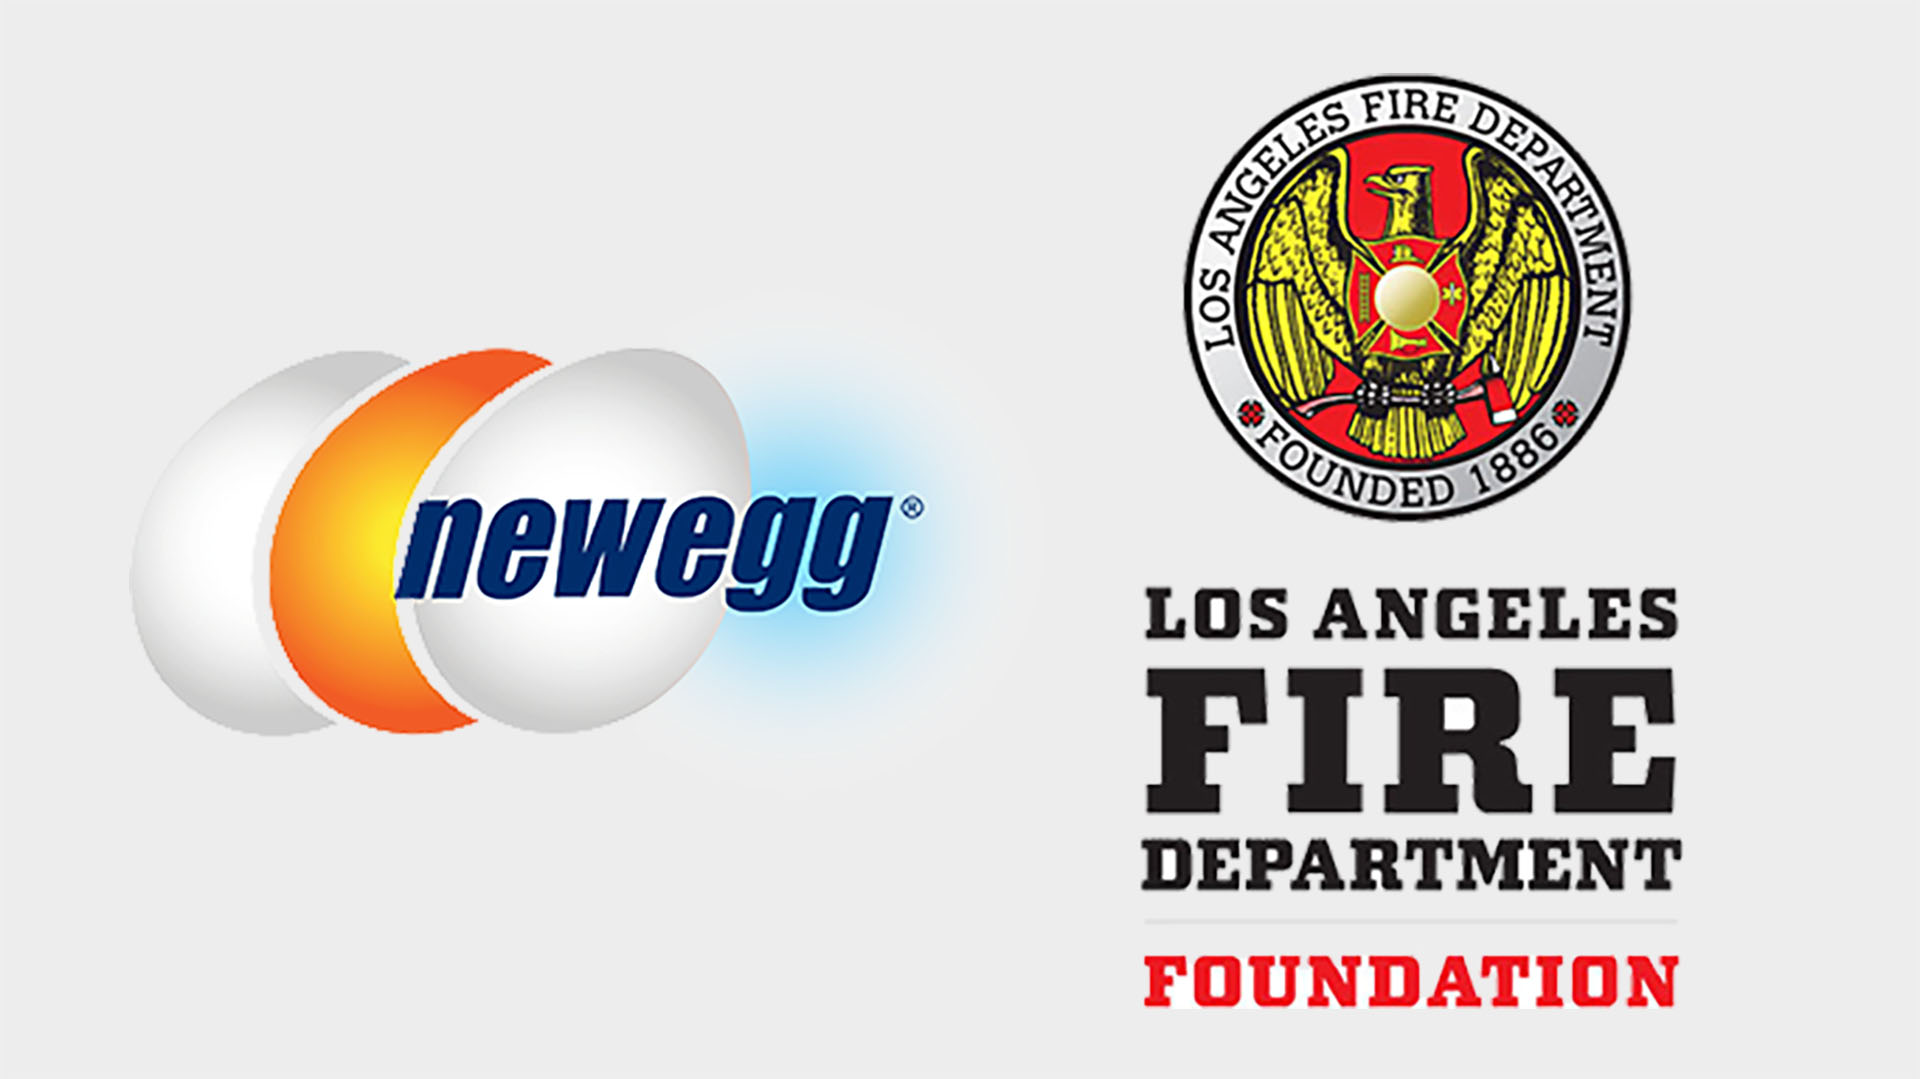  Buy a new GPU and support wildfire prevention with Newegg's LA firefighter fundraiser 